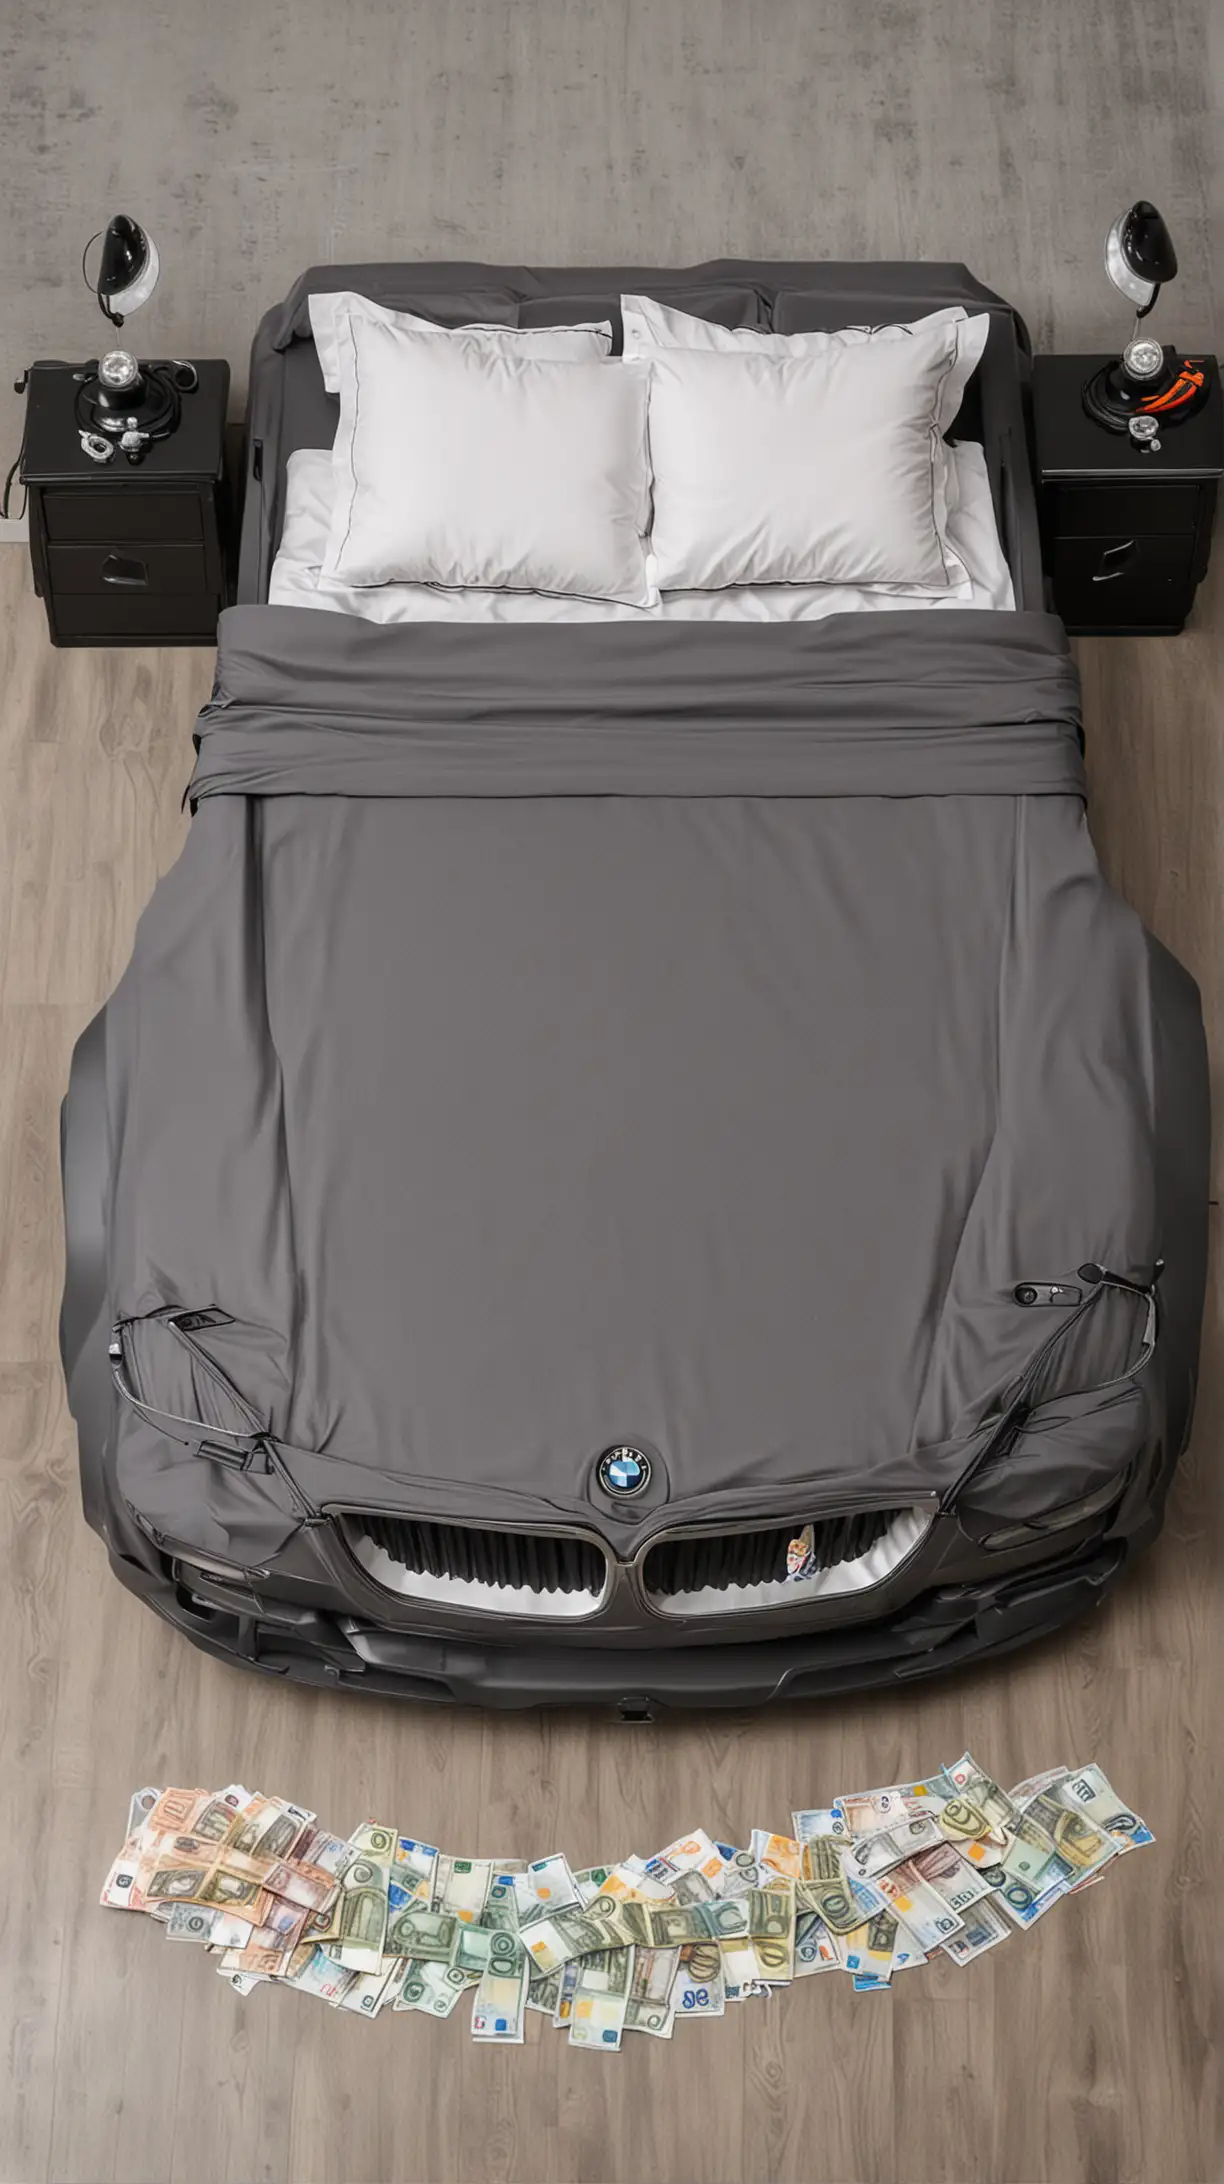 Double bed in the shape of a BMW car with headlights on and with a euro money worm graphite